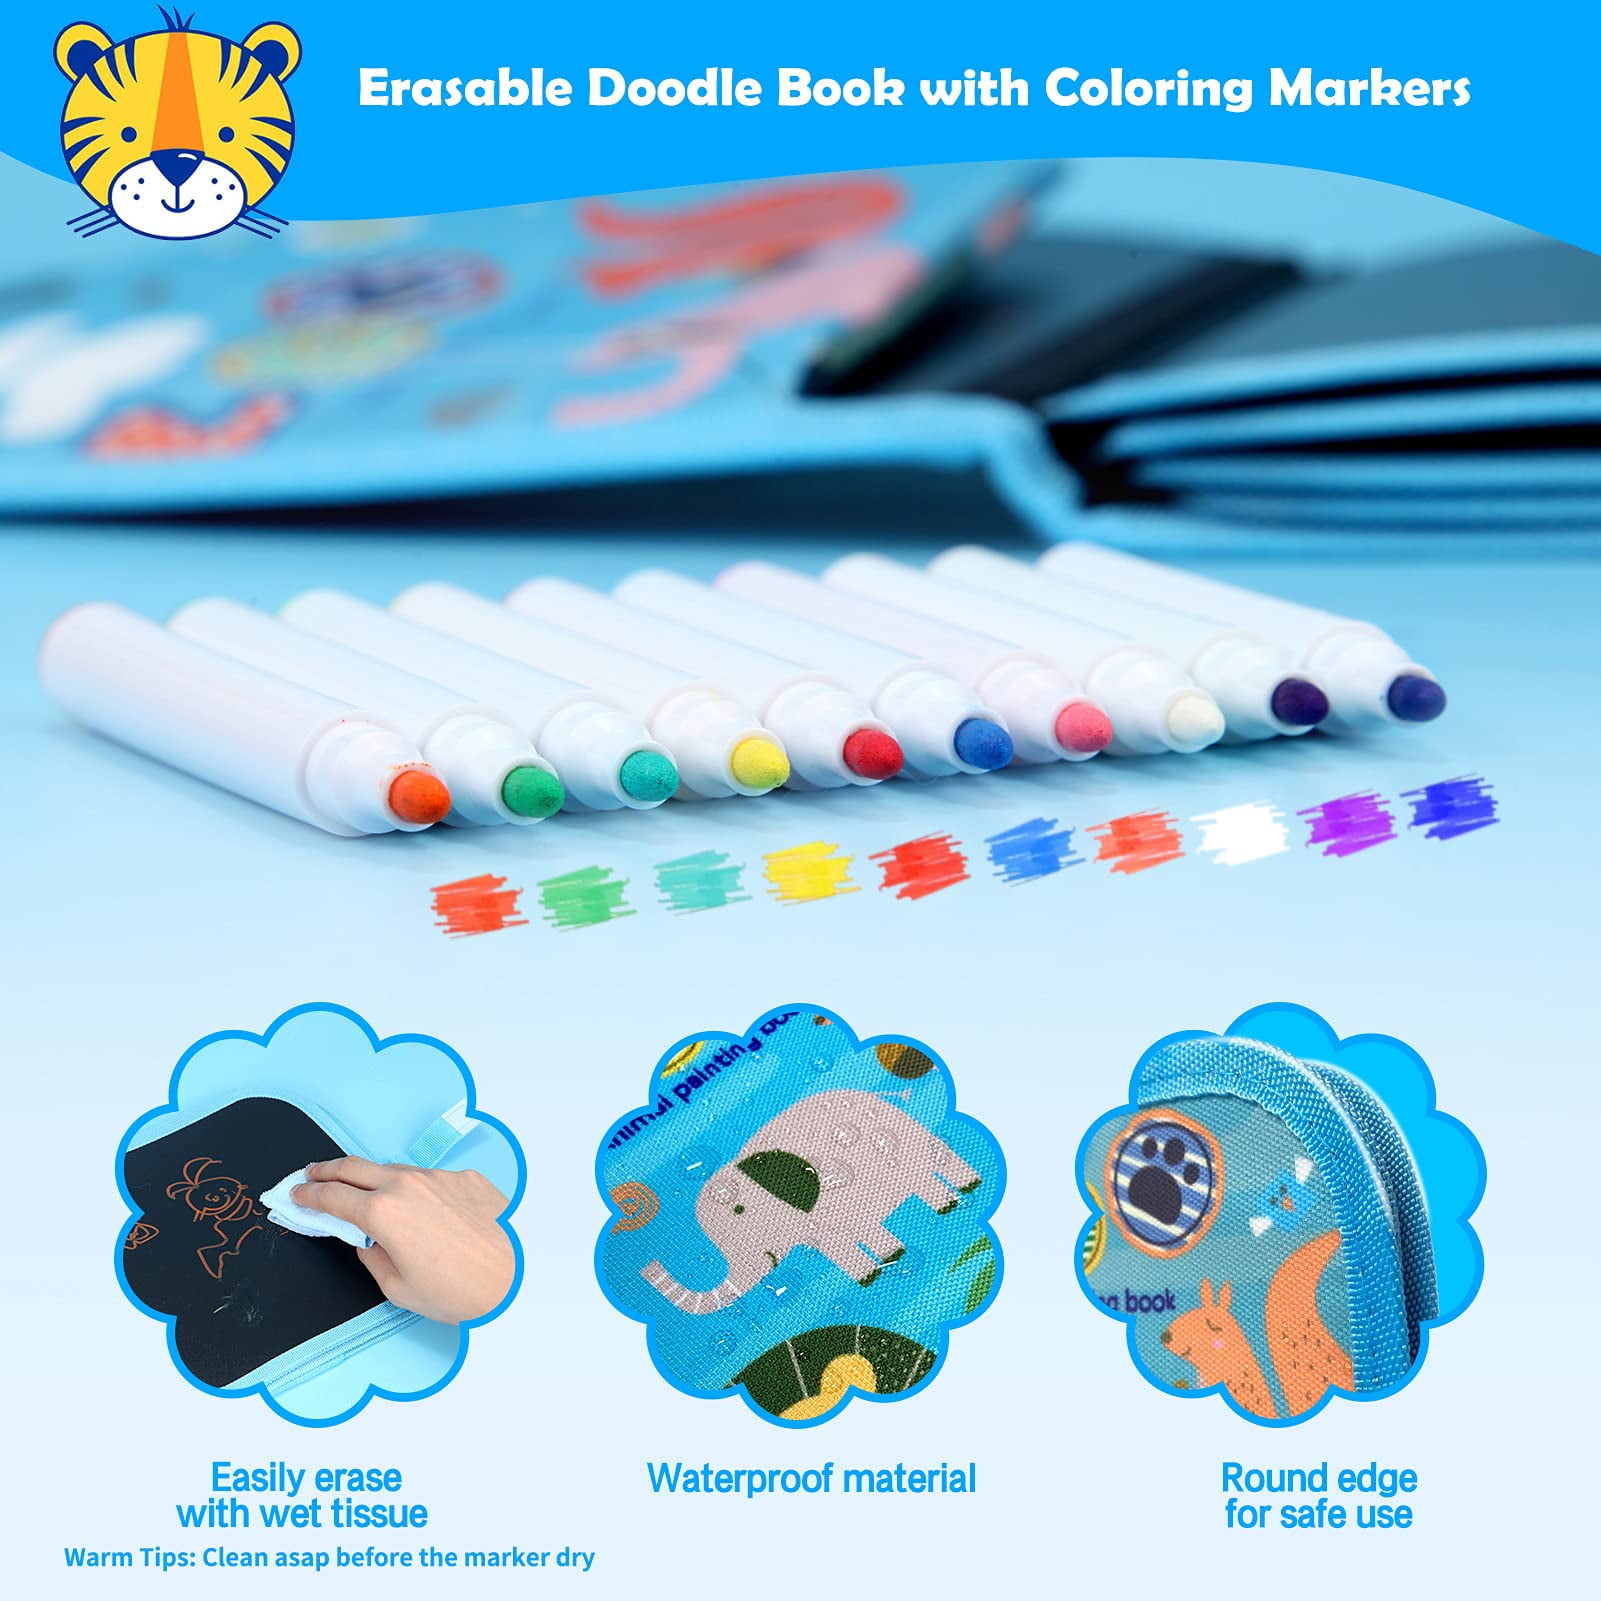 Erasable Doodle Books, Portable Reusable Drawing Board with